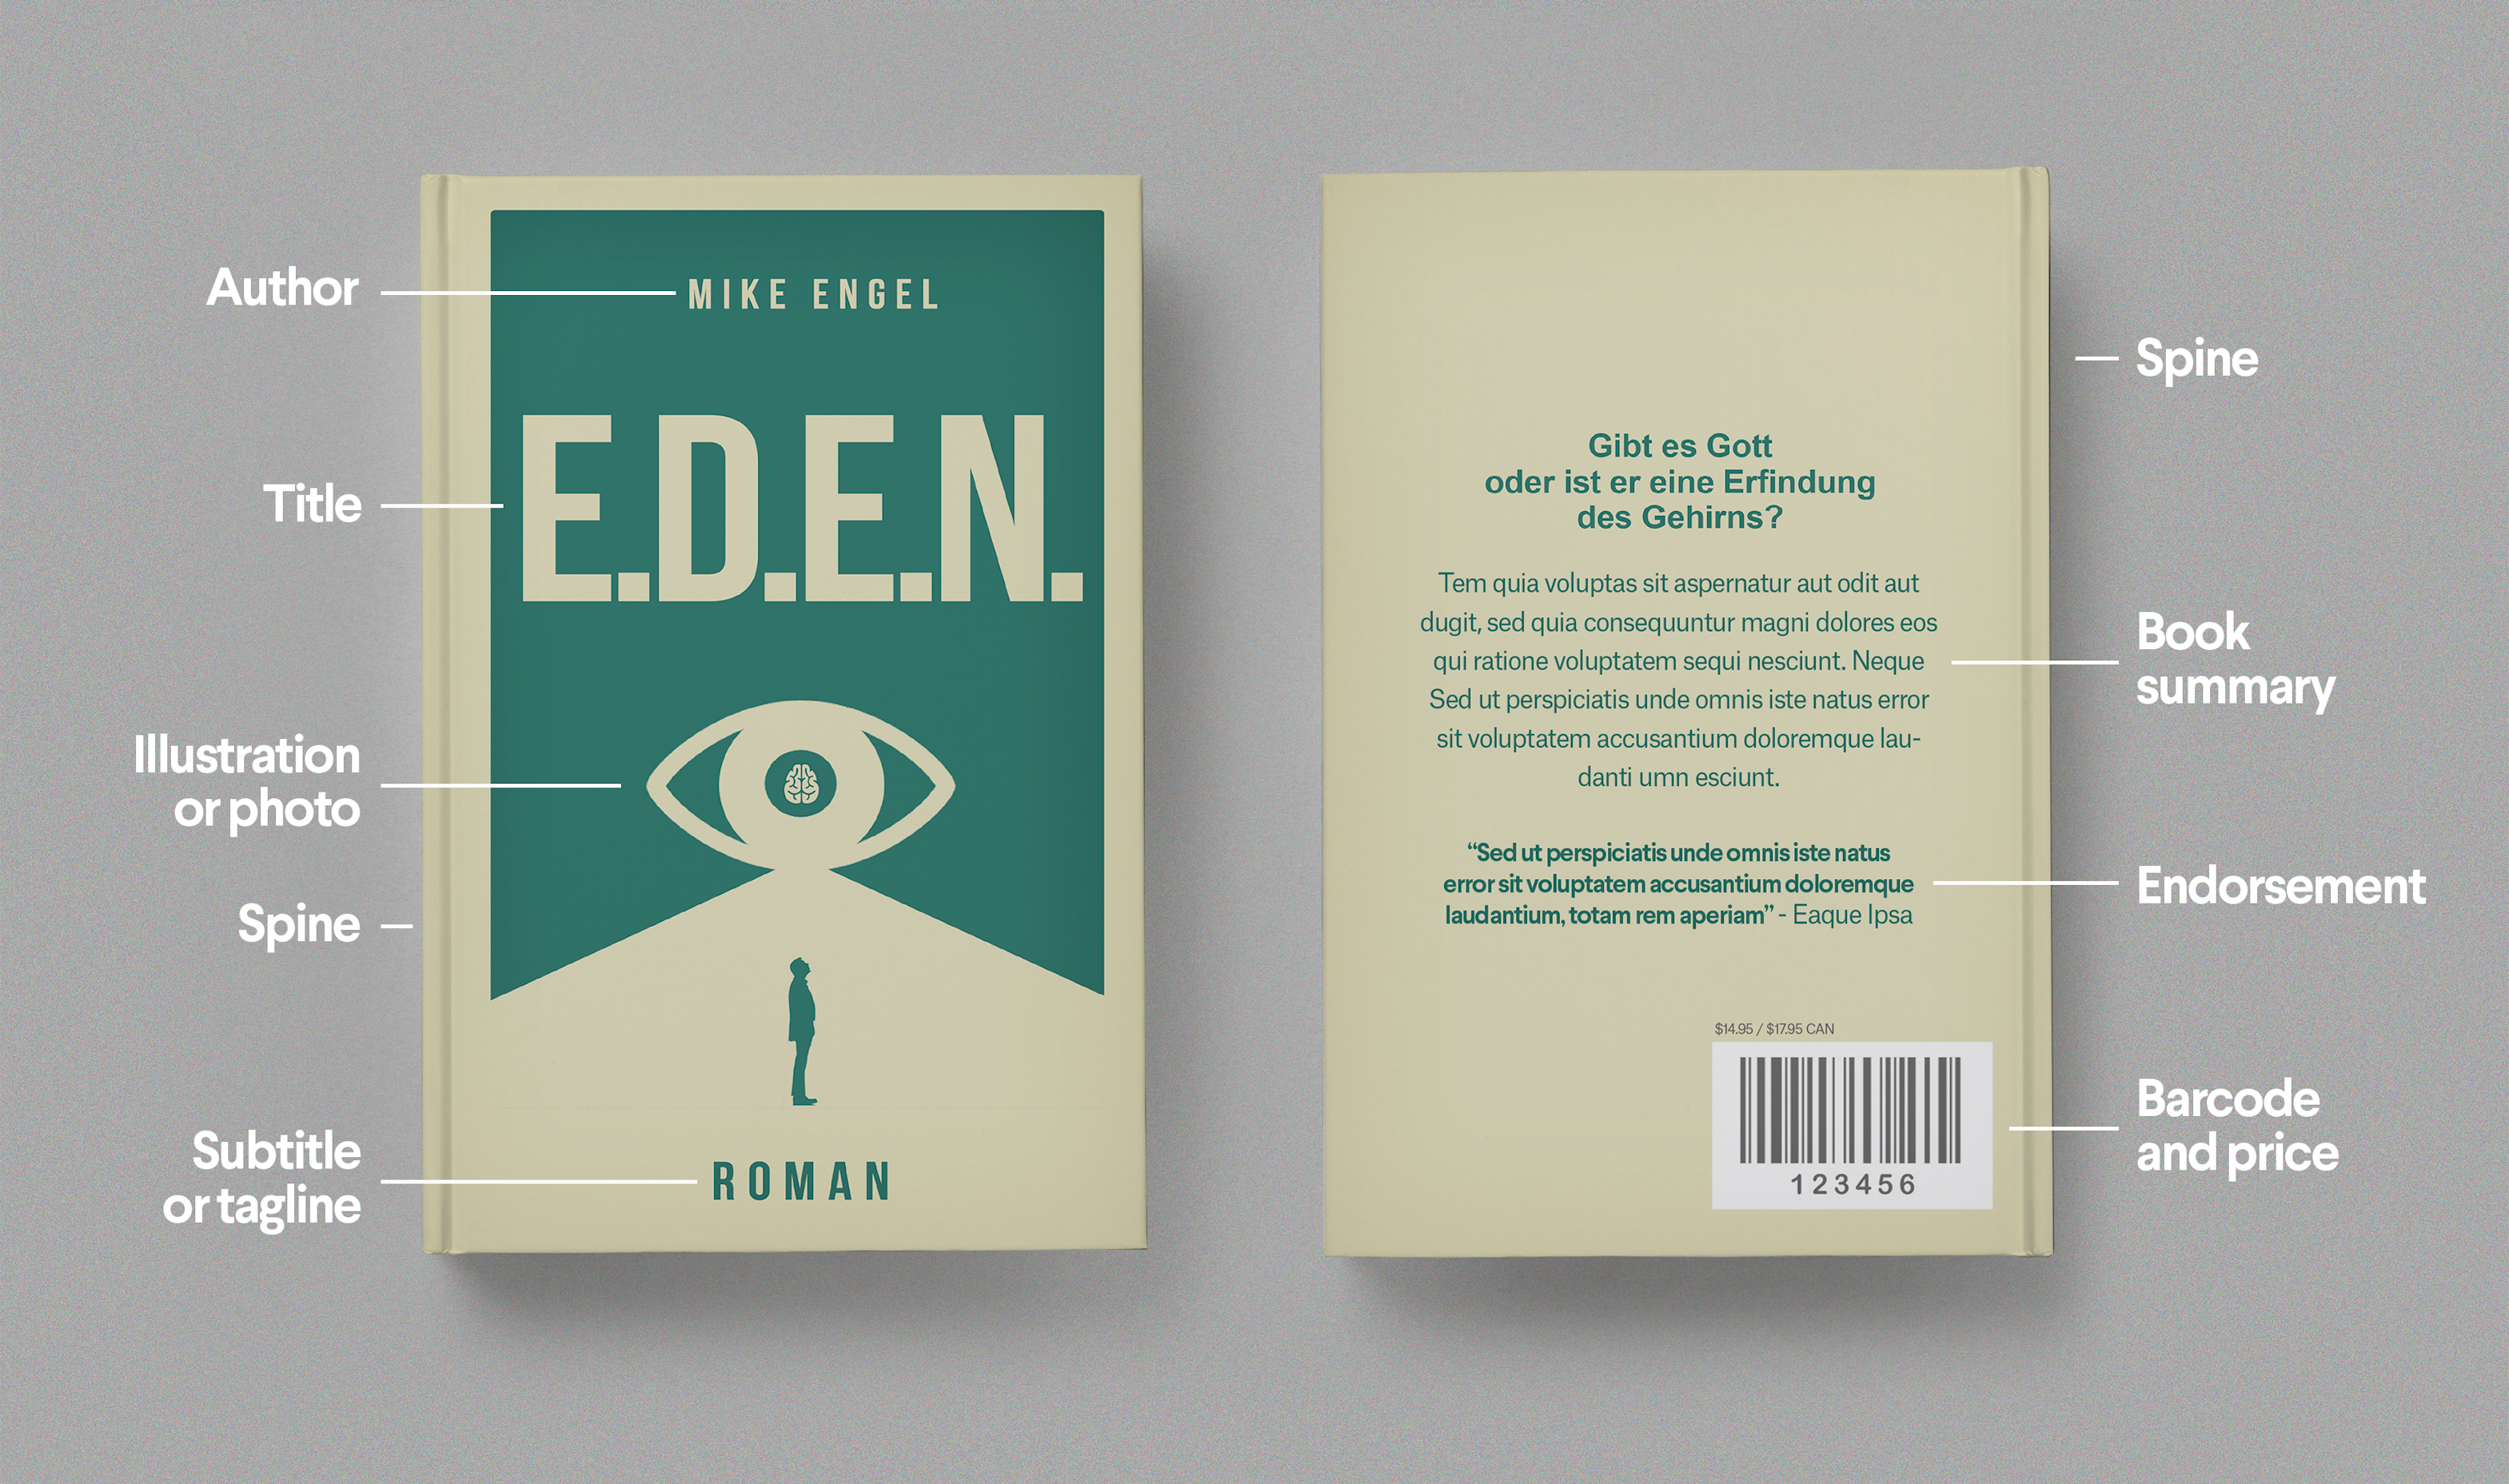 Anatomy of a book cover - 99designs